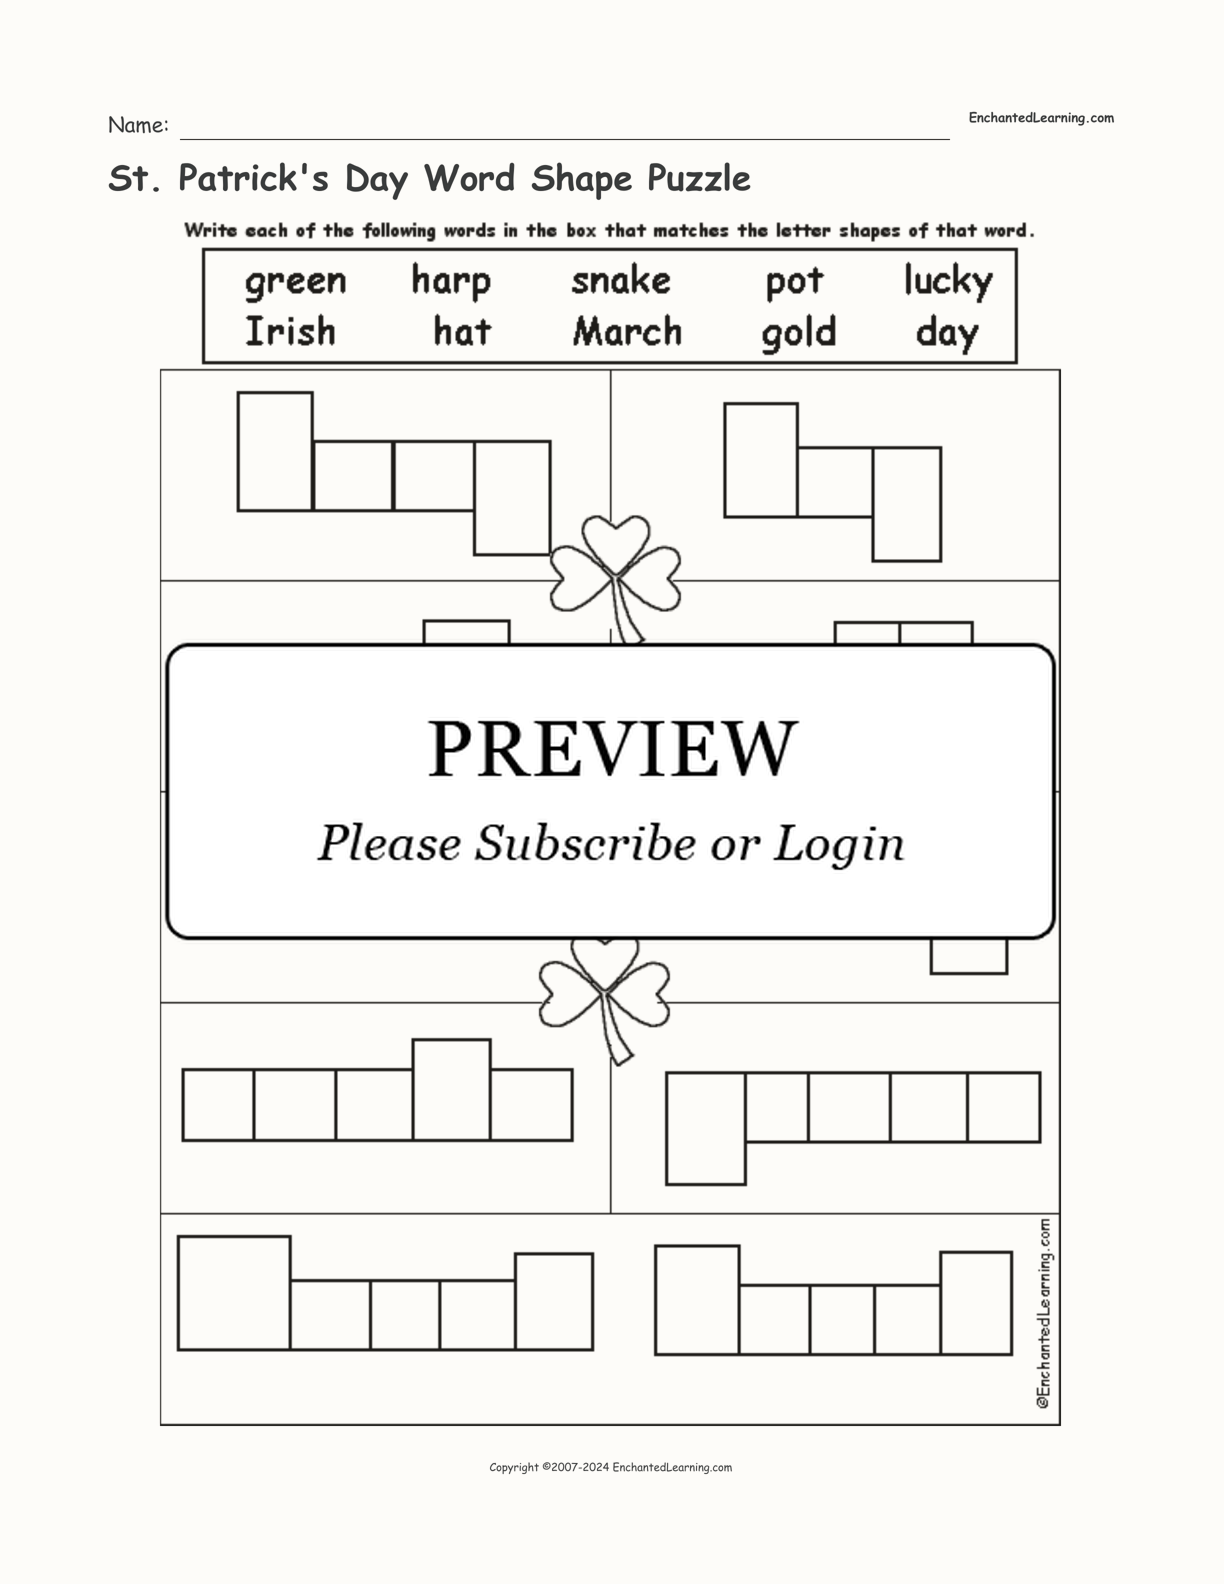 St. Patrick's Day Word Shape Puzzle interactive worksheet page 1